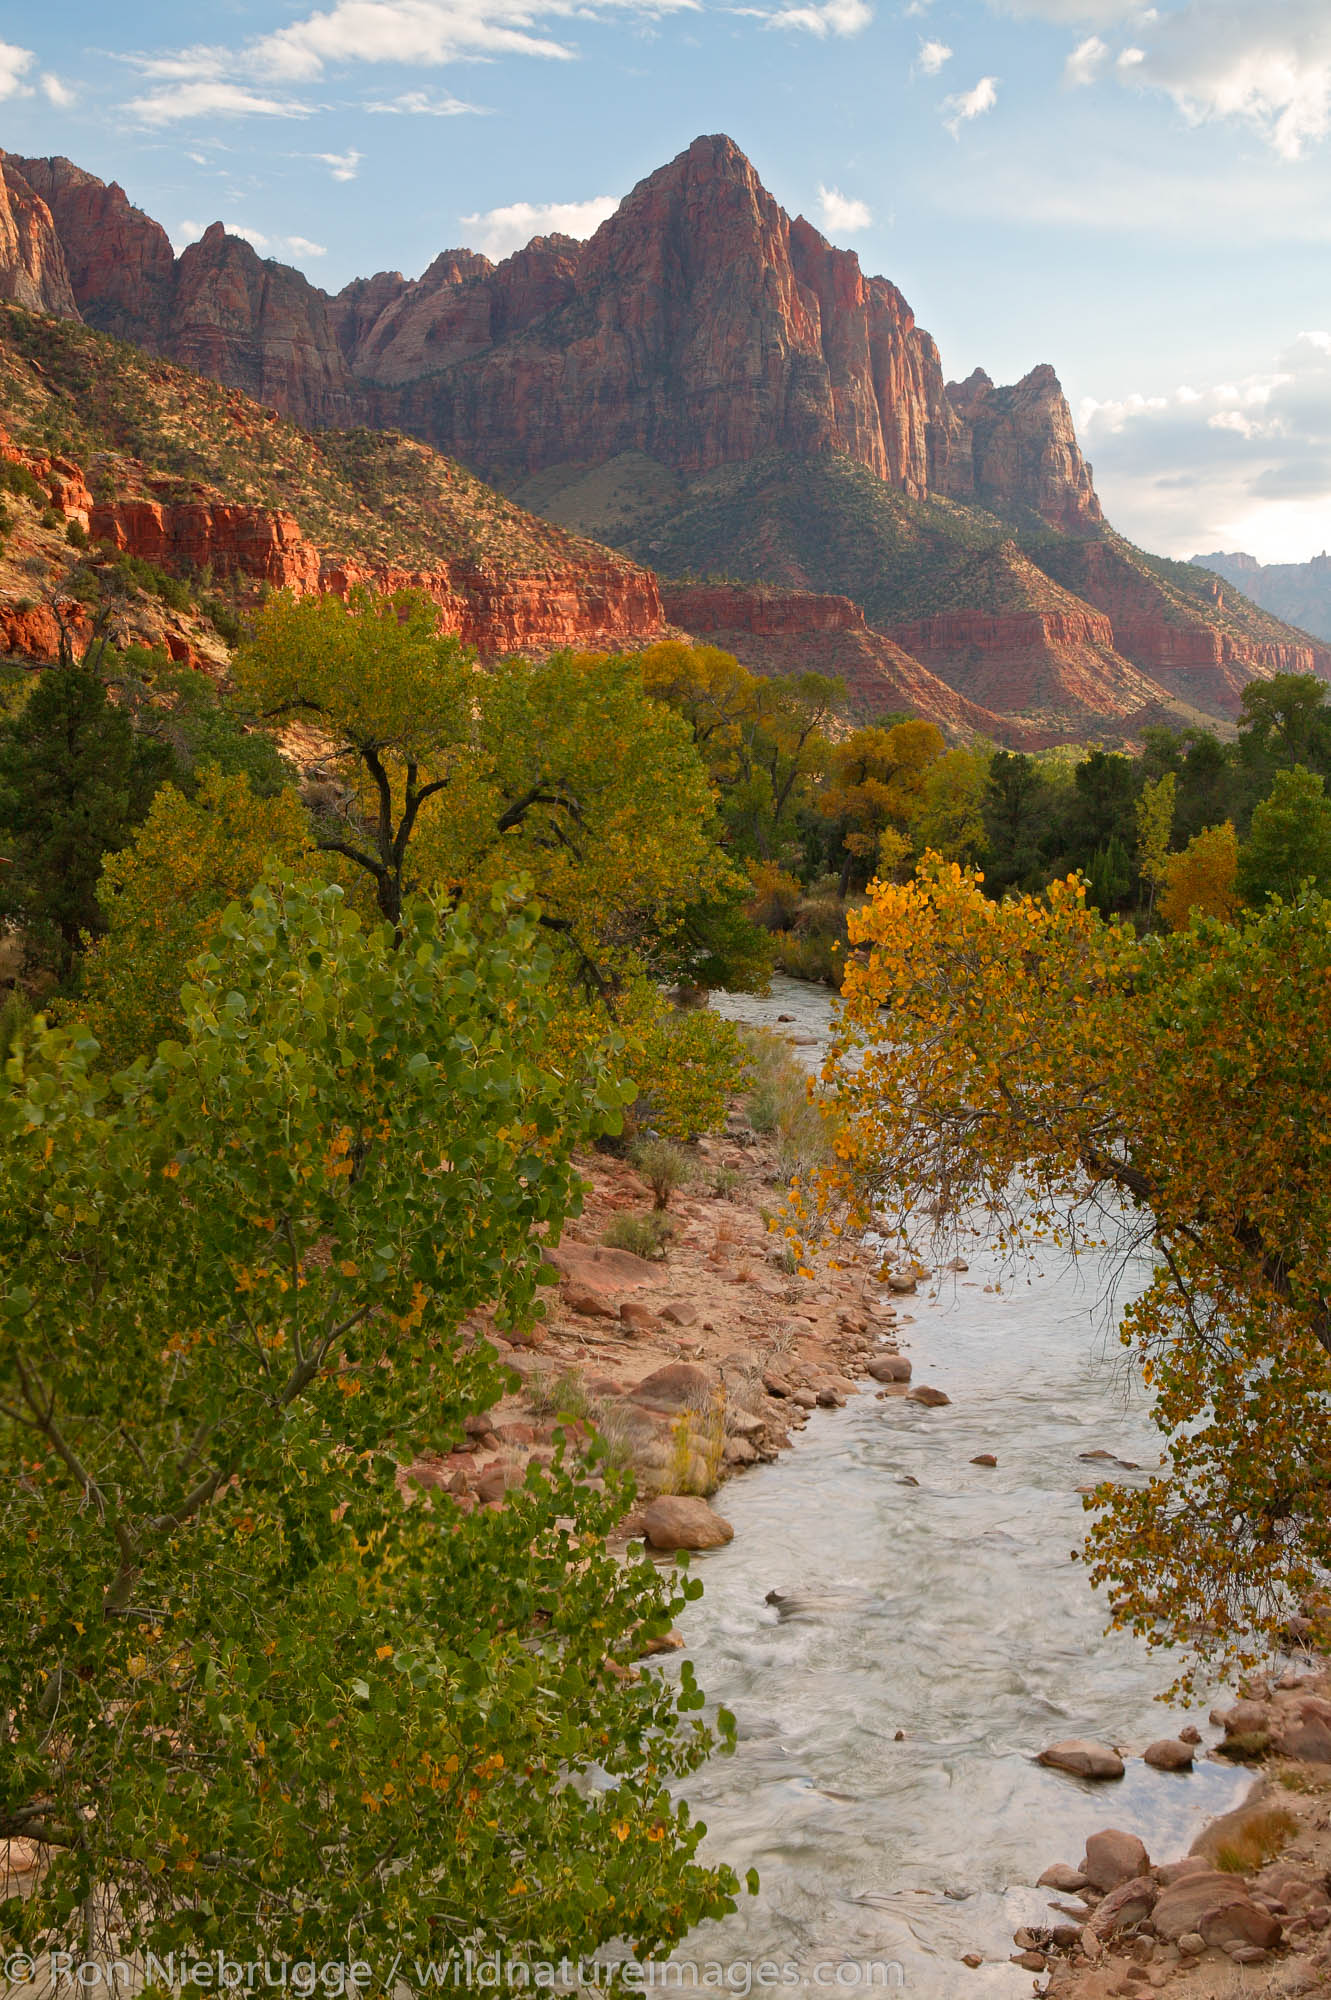 North Fork Virgin River and The Watchman, Zion National Park, Utah.